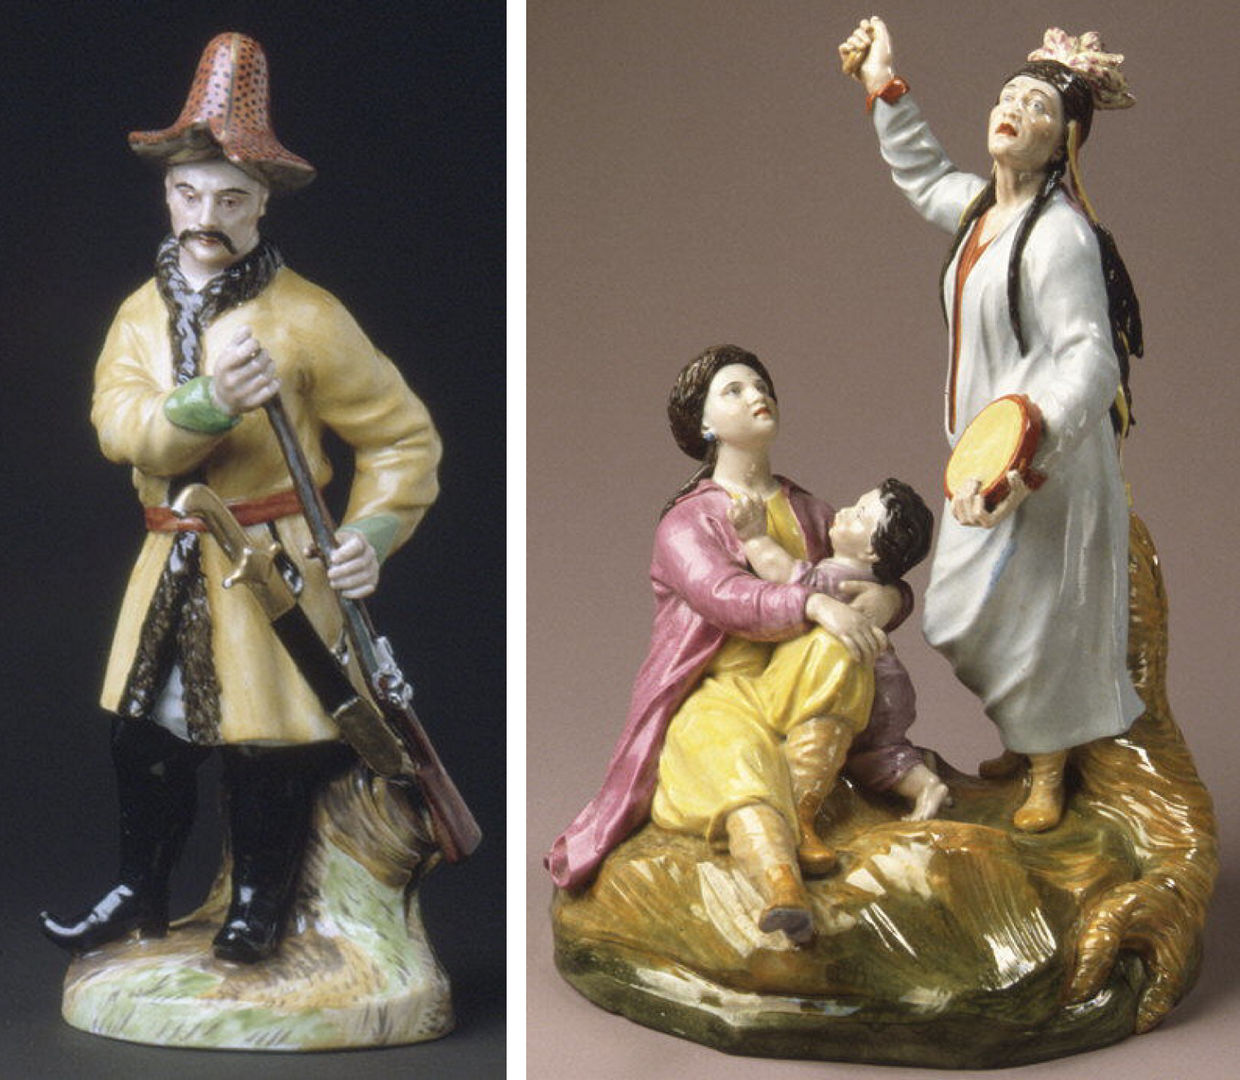 Diptych of two porcelain figures: one showing a man with a riffle and the other showing a mother, child and a female shaman